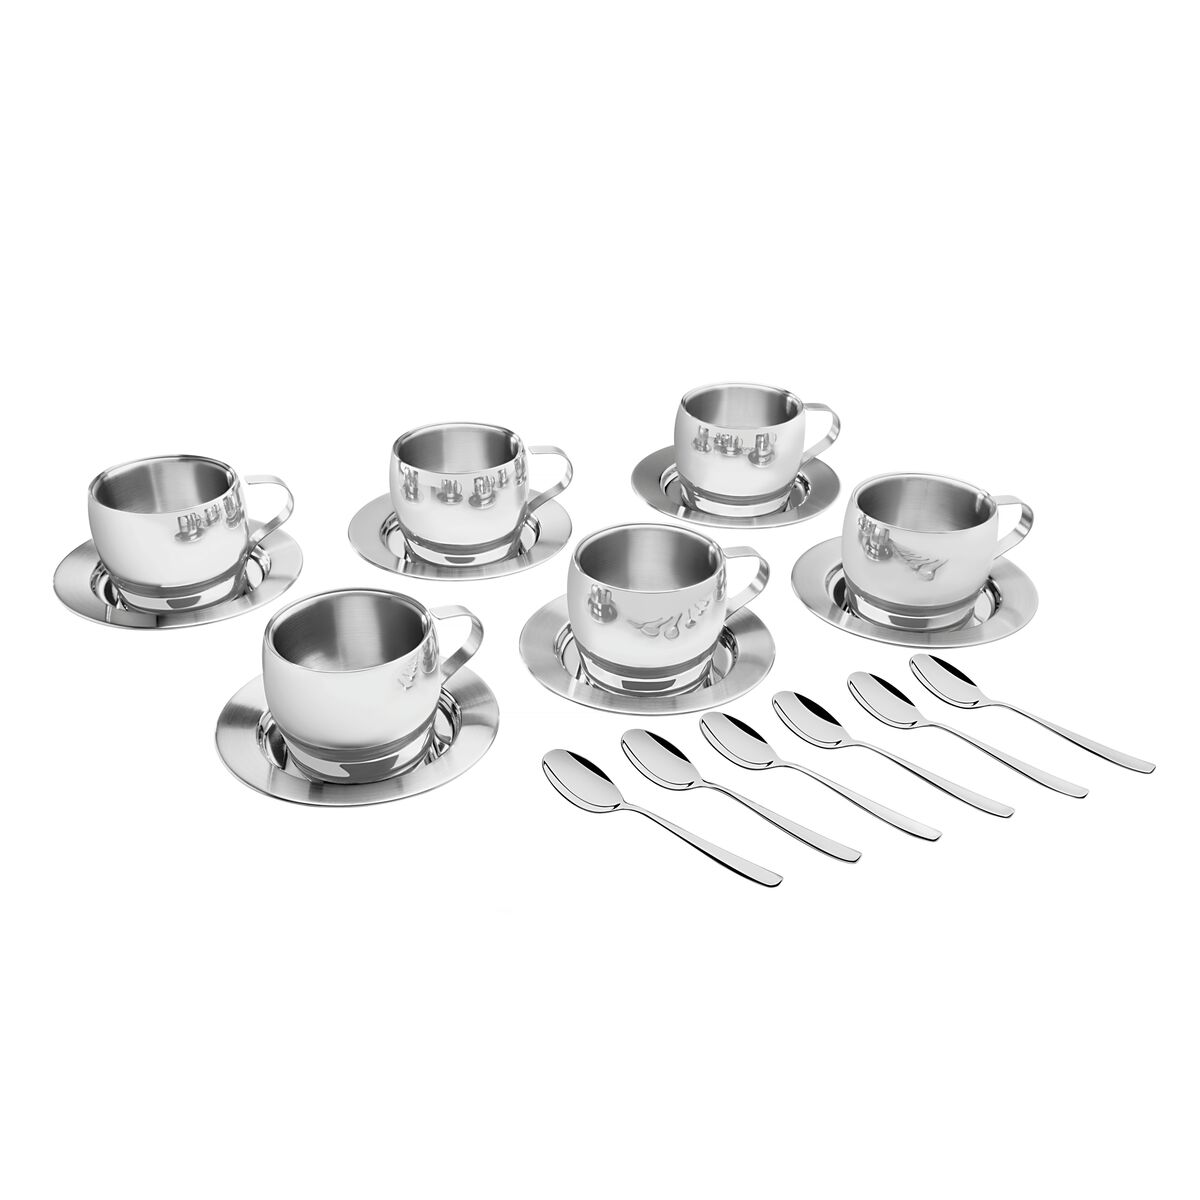 Tramontina glossy stainless steel tea and cappuccino set with cup, square saucer and spoon, 18 pieces